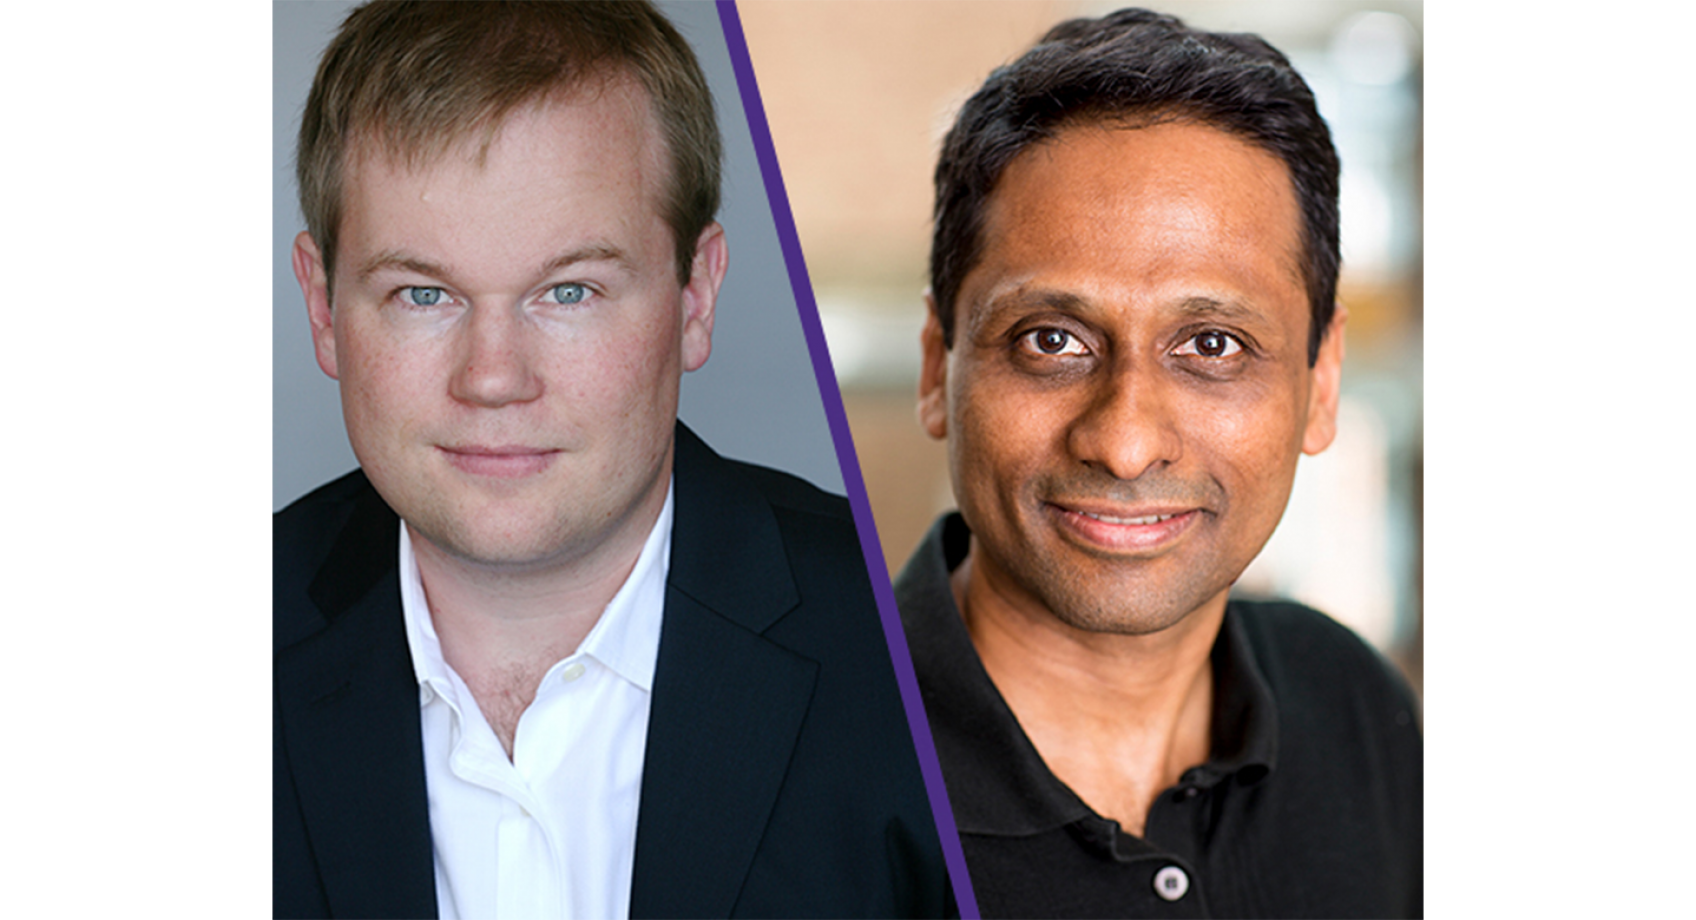 Professors Michael Taylor and Arvind Krishnamurthy will help spur innovation in distributed computing as part of new multi-university research center Banner